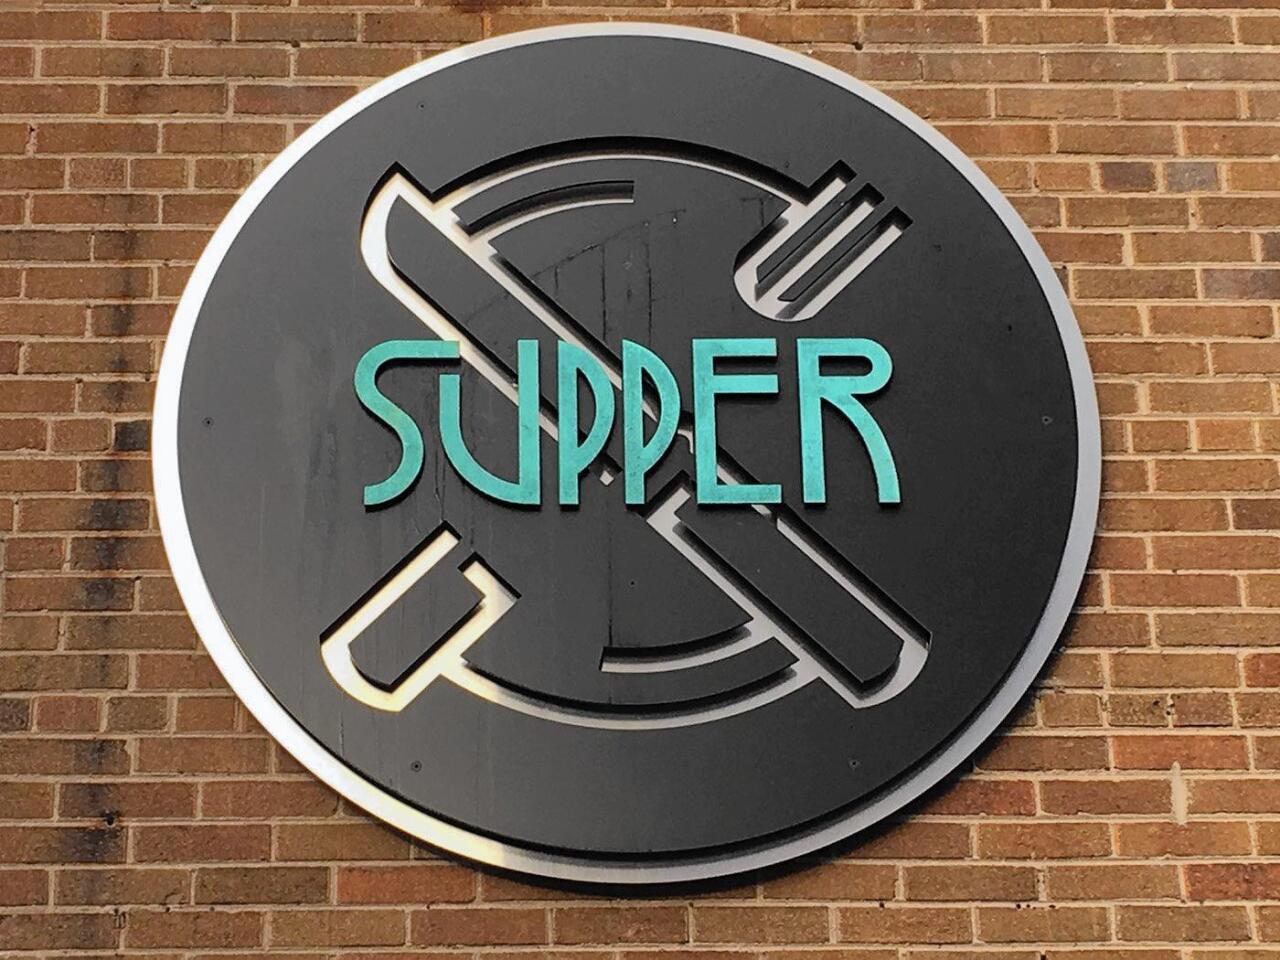 Supper sign